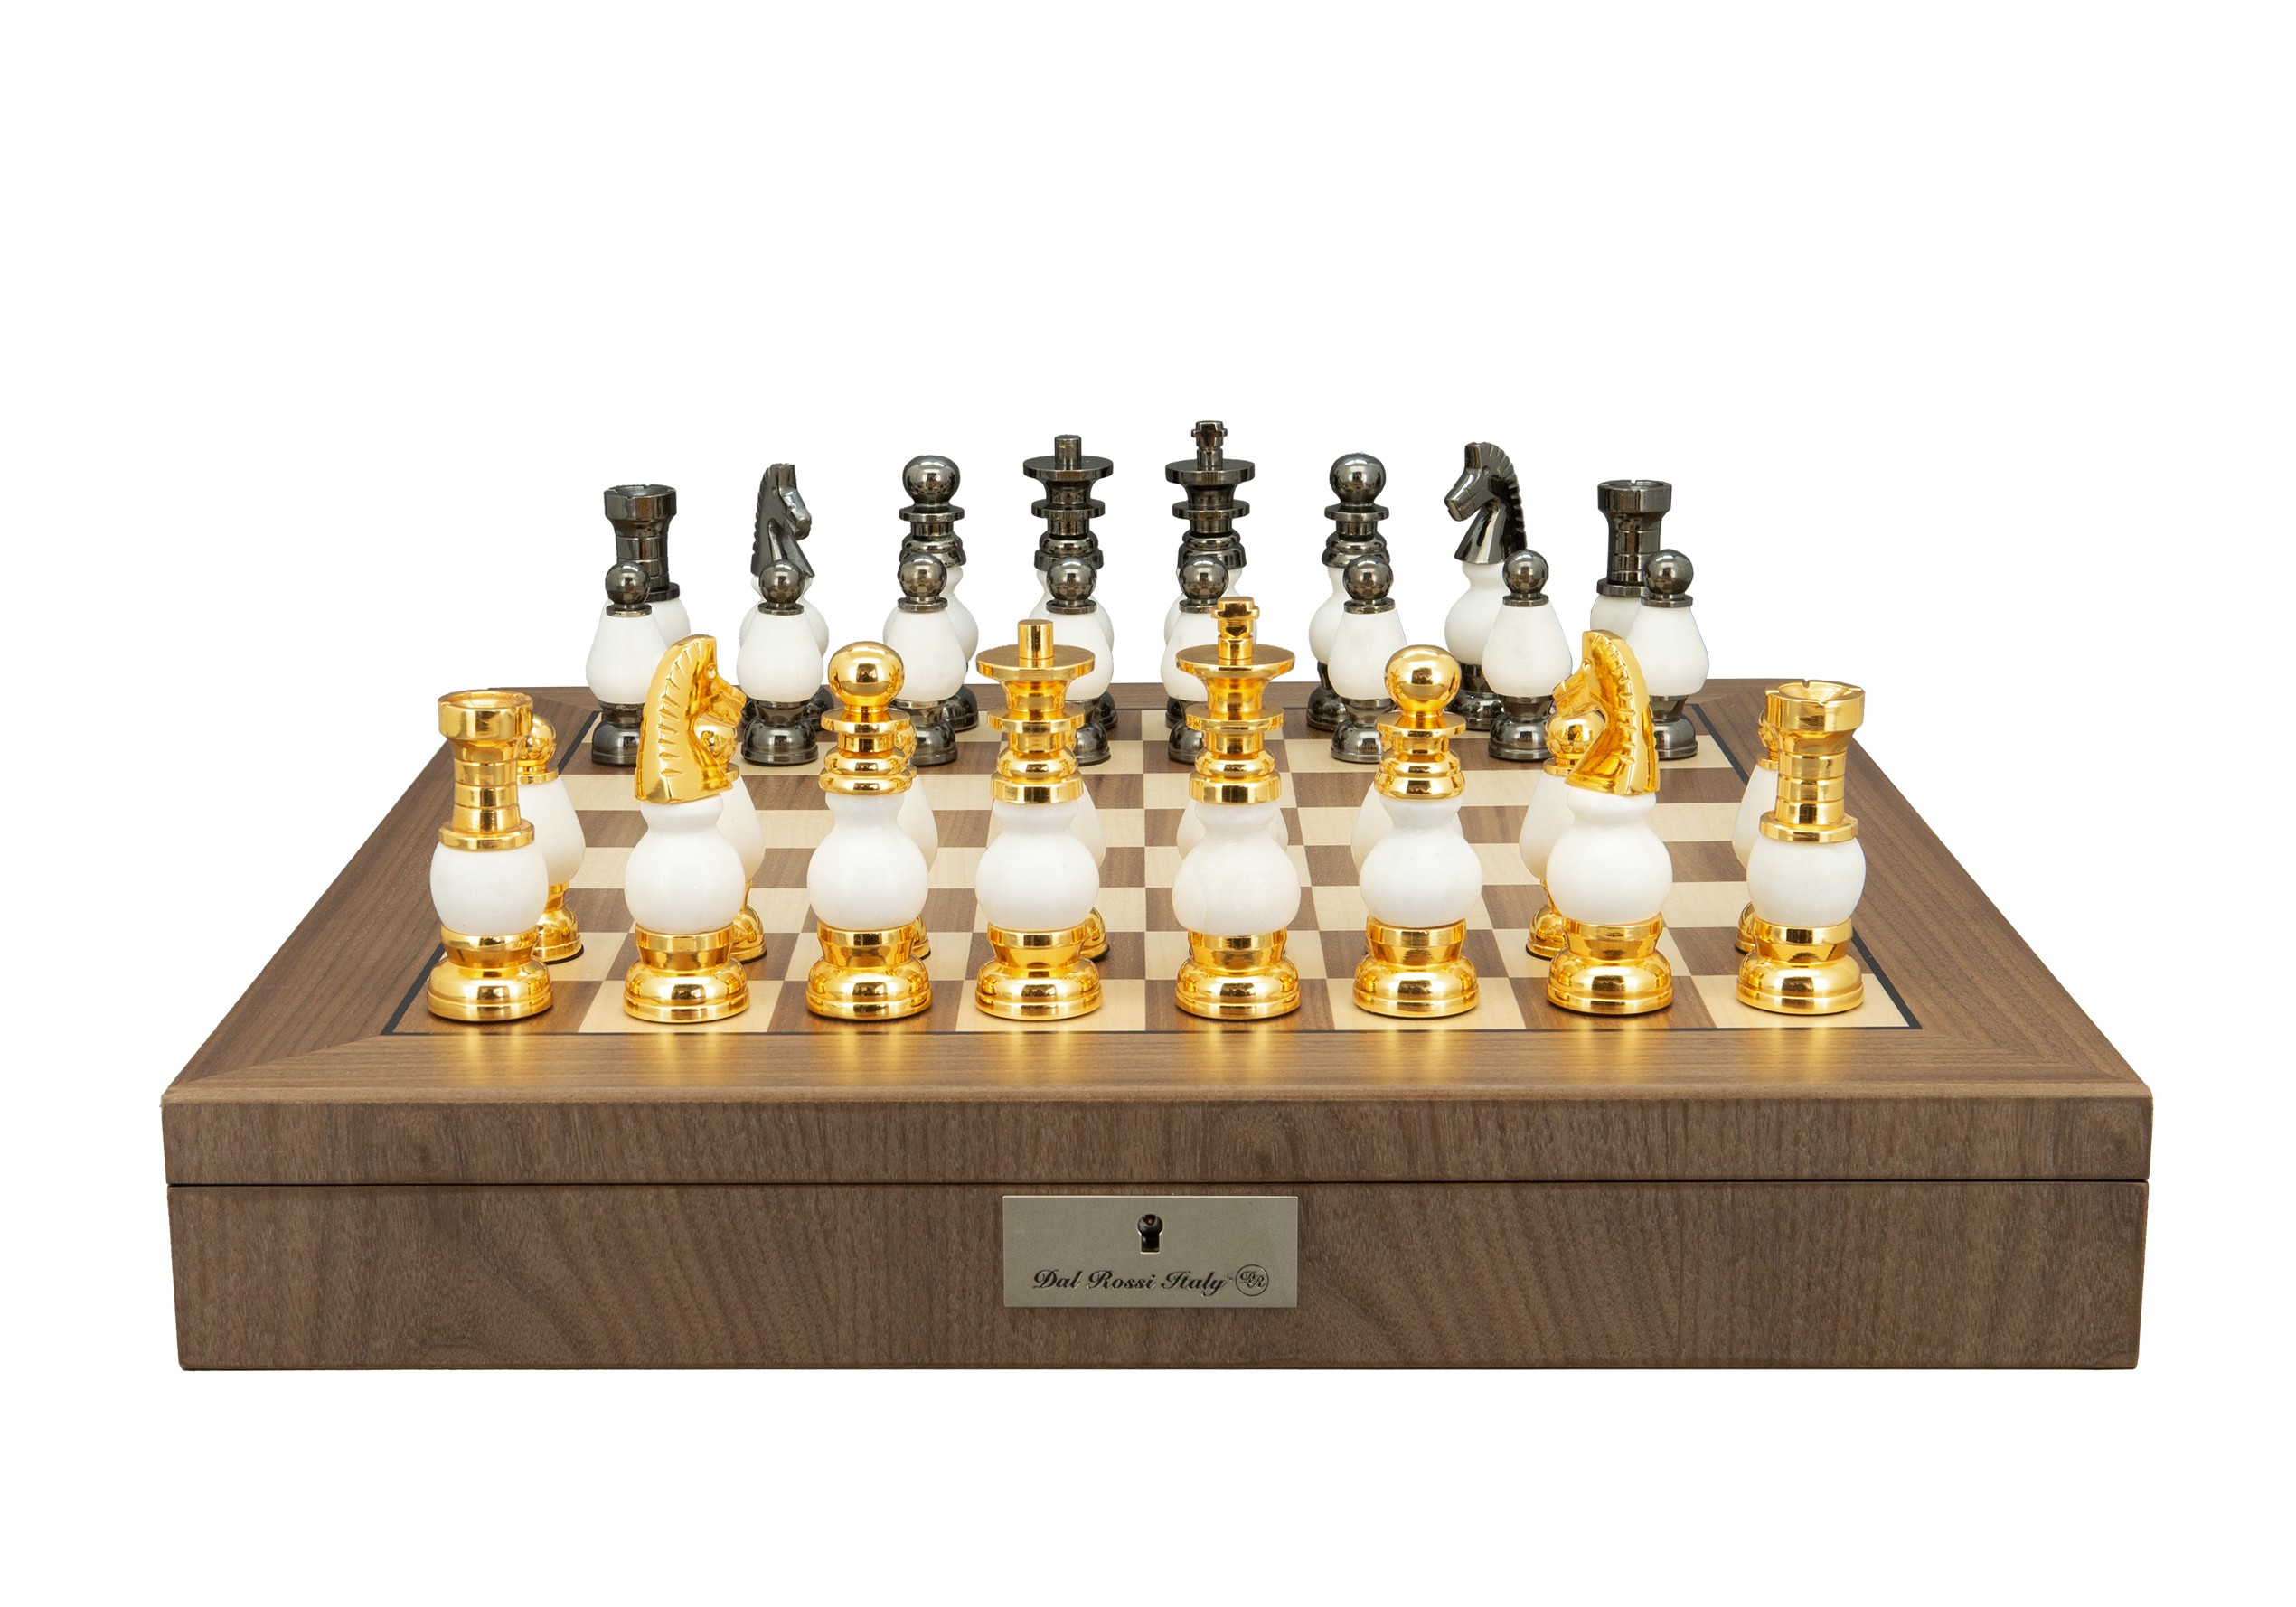 Dal Rossi Italy, White Stone and Gold Chessmen 100mm Chessmen on a Walnut Inlaid Chess Box with Compartments 20"